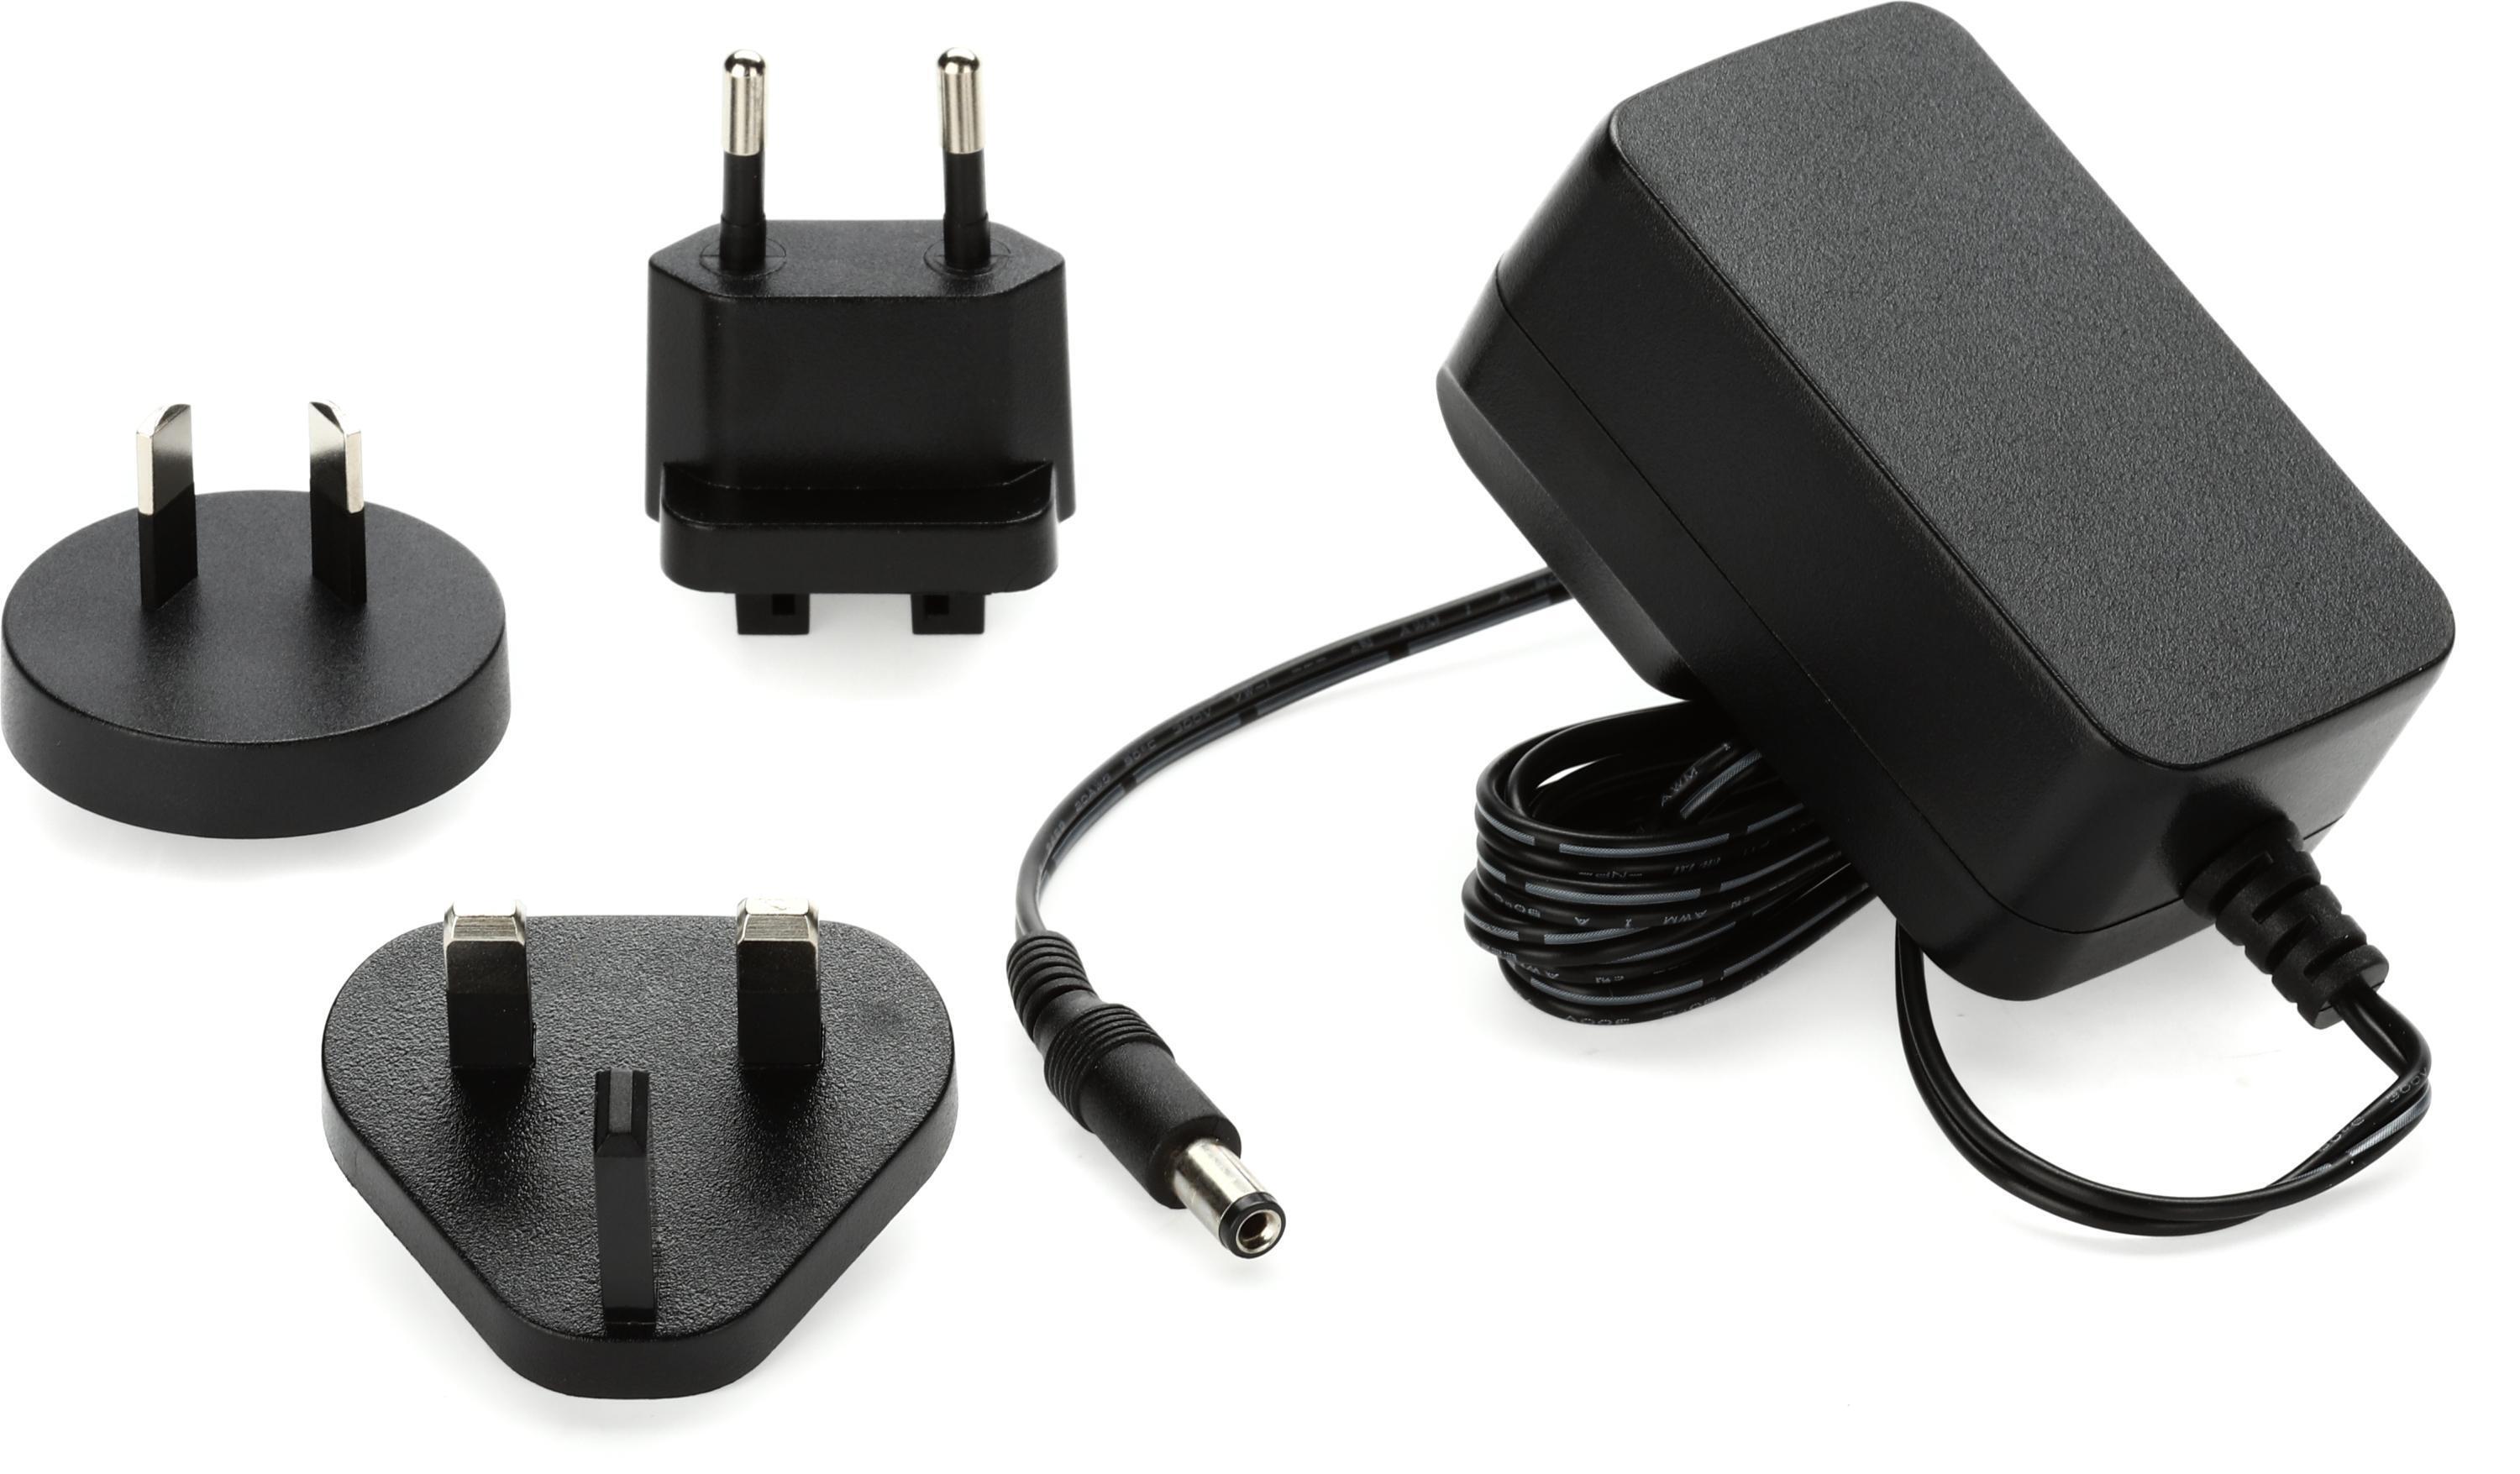 Spare 5V DC Power Adapter - Power Adapters, Computer Parts